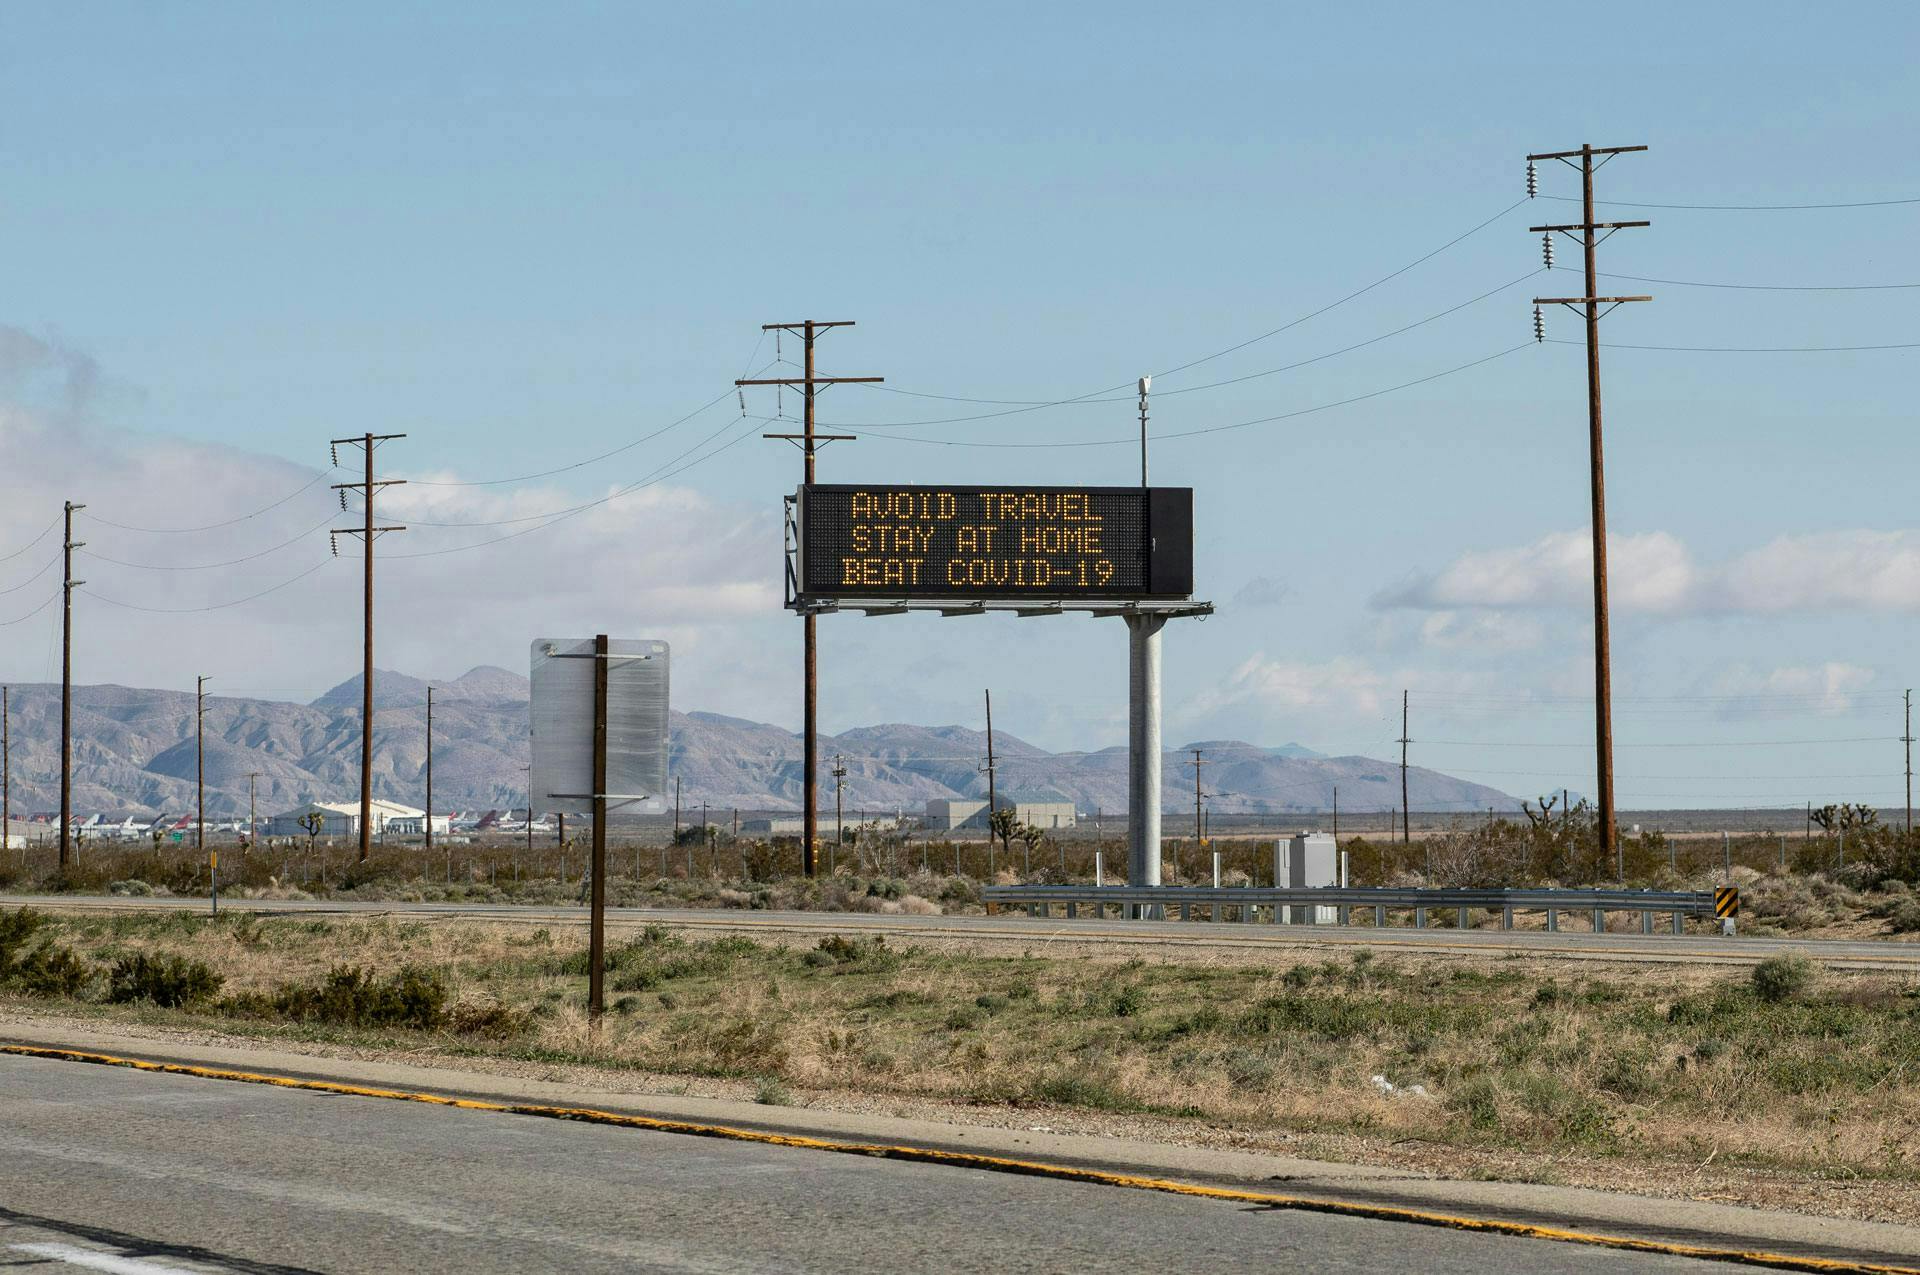 Digital highway sign displays "AVOID TRAVEL STAY AT HOME BEAT COVID-19" in a desert landscape, with a distant mountain range and scattered power lines.